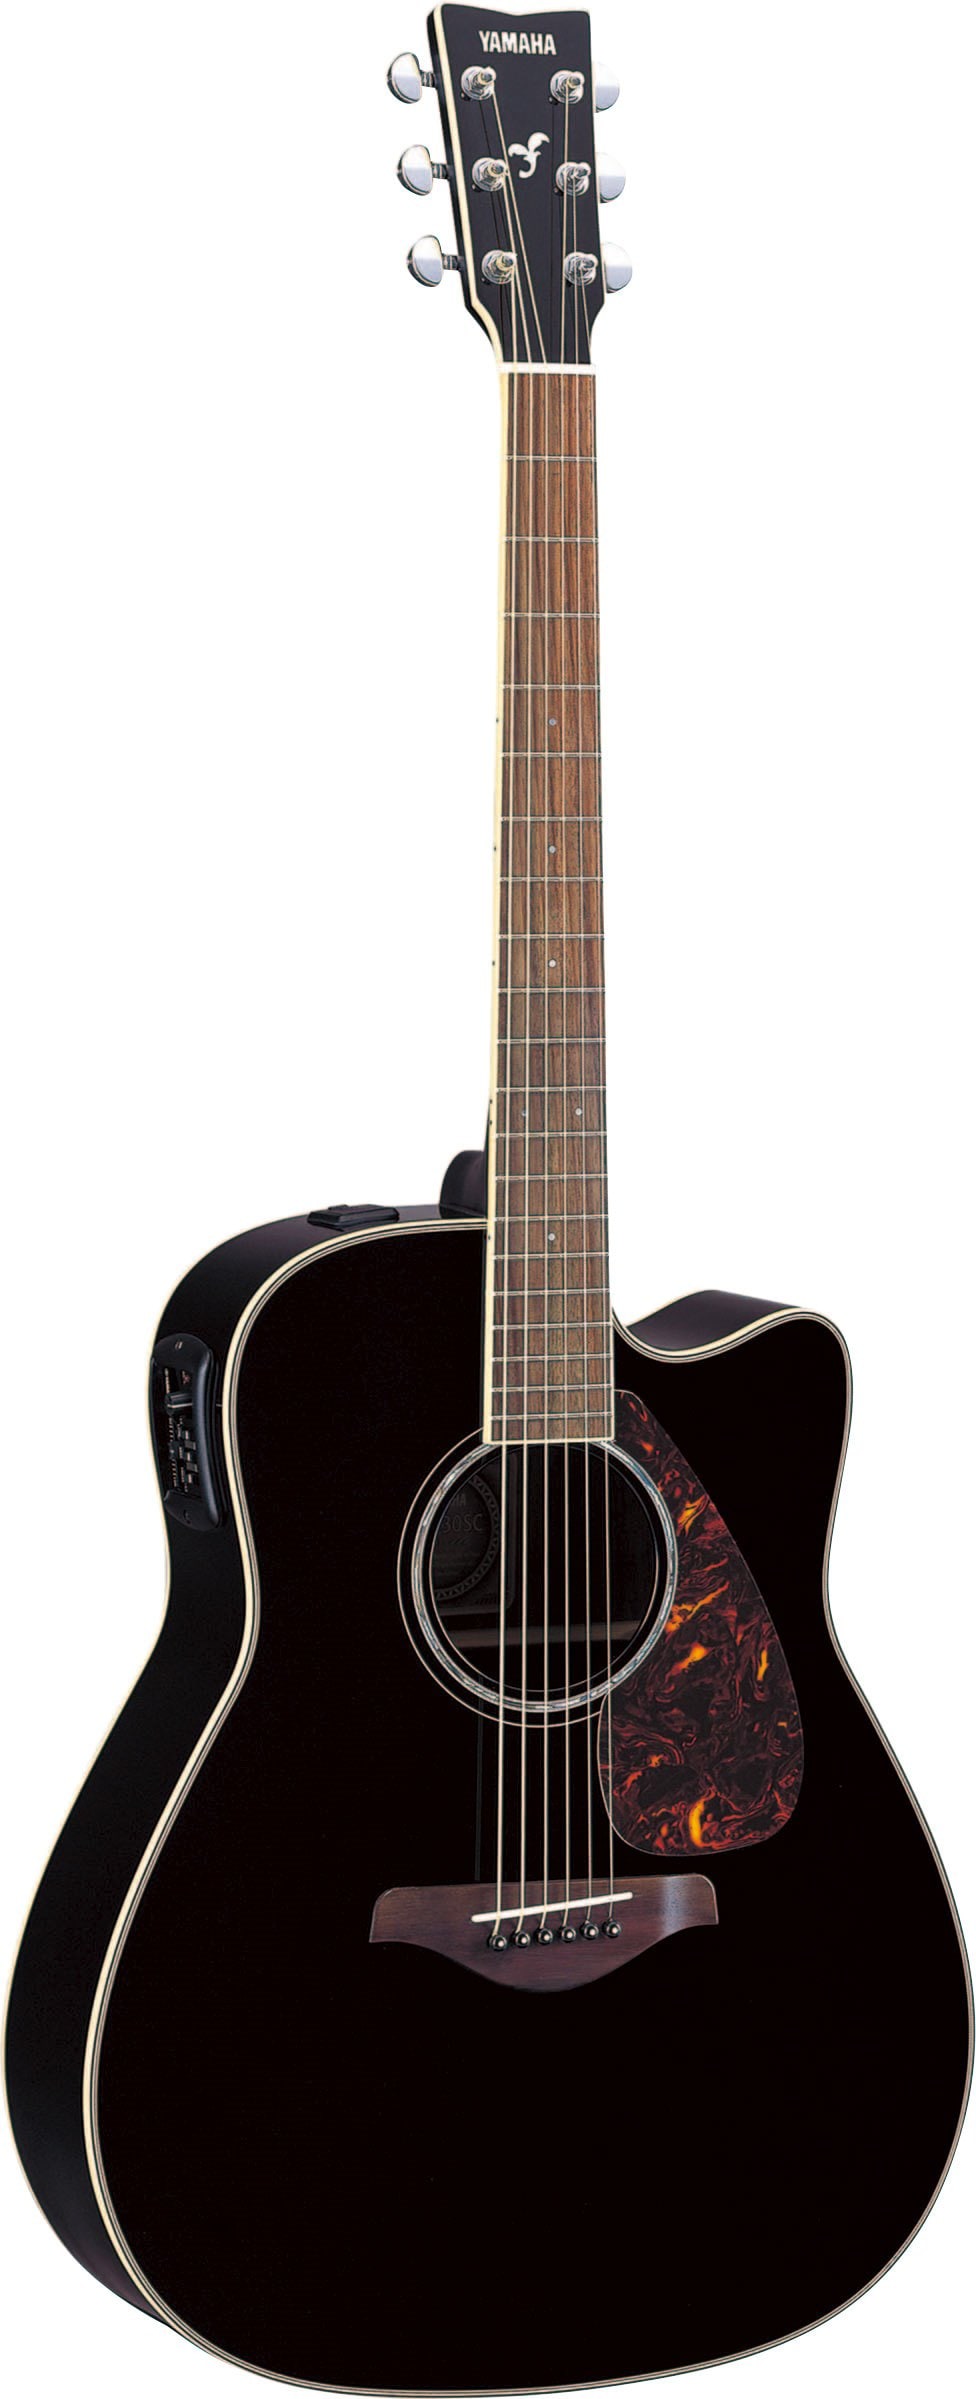 FG / FGX / FSX / FJX Series - Overview - Acoustic Guitars 